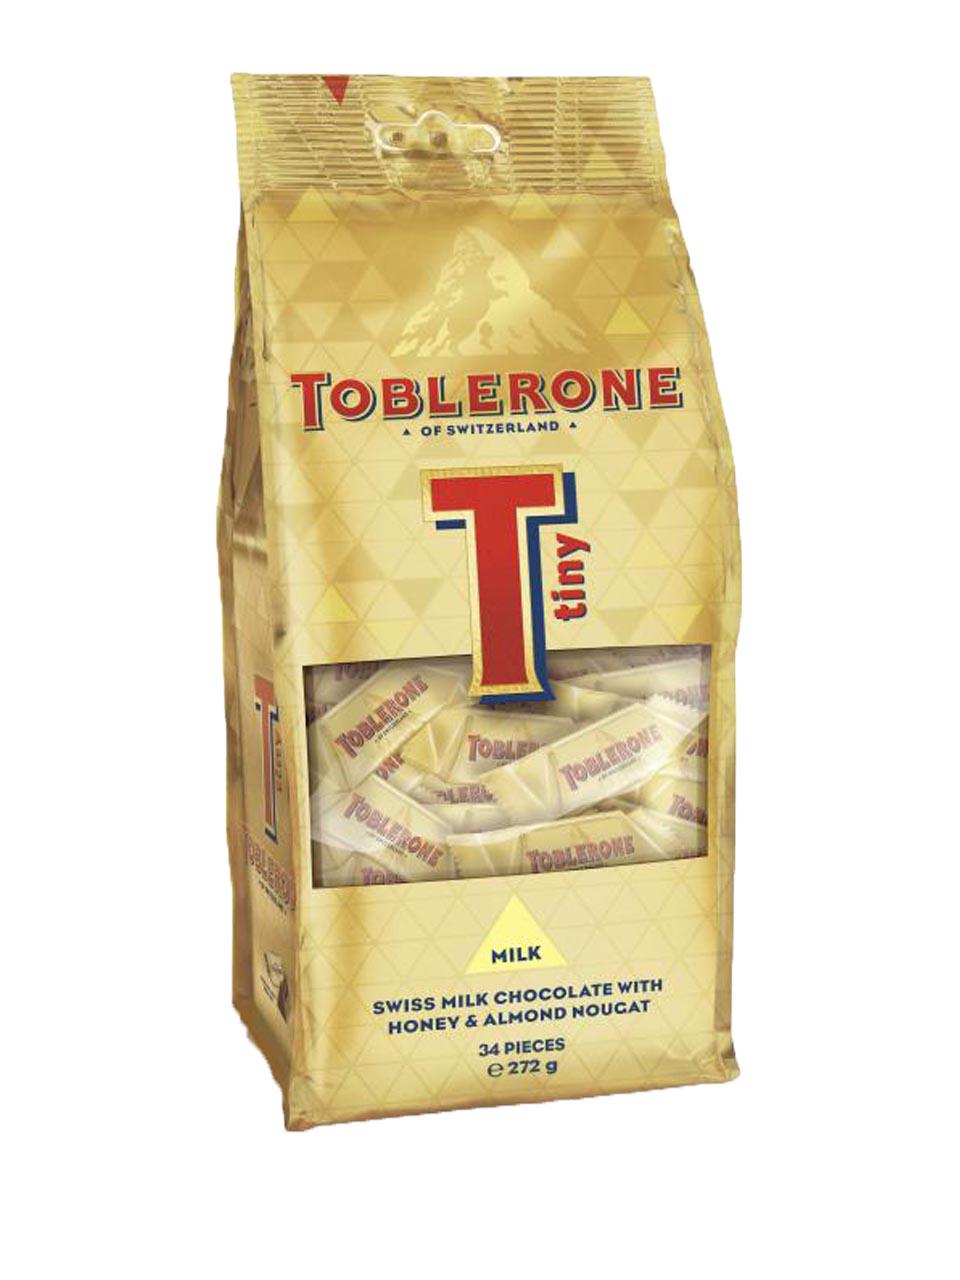 toblerone white chocolate with almonds, honey and nougat 50g